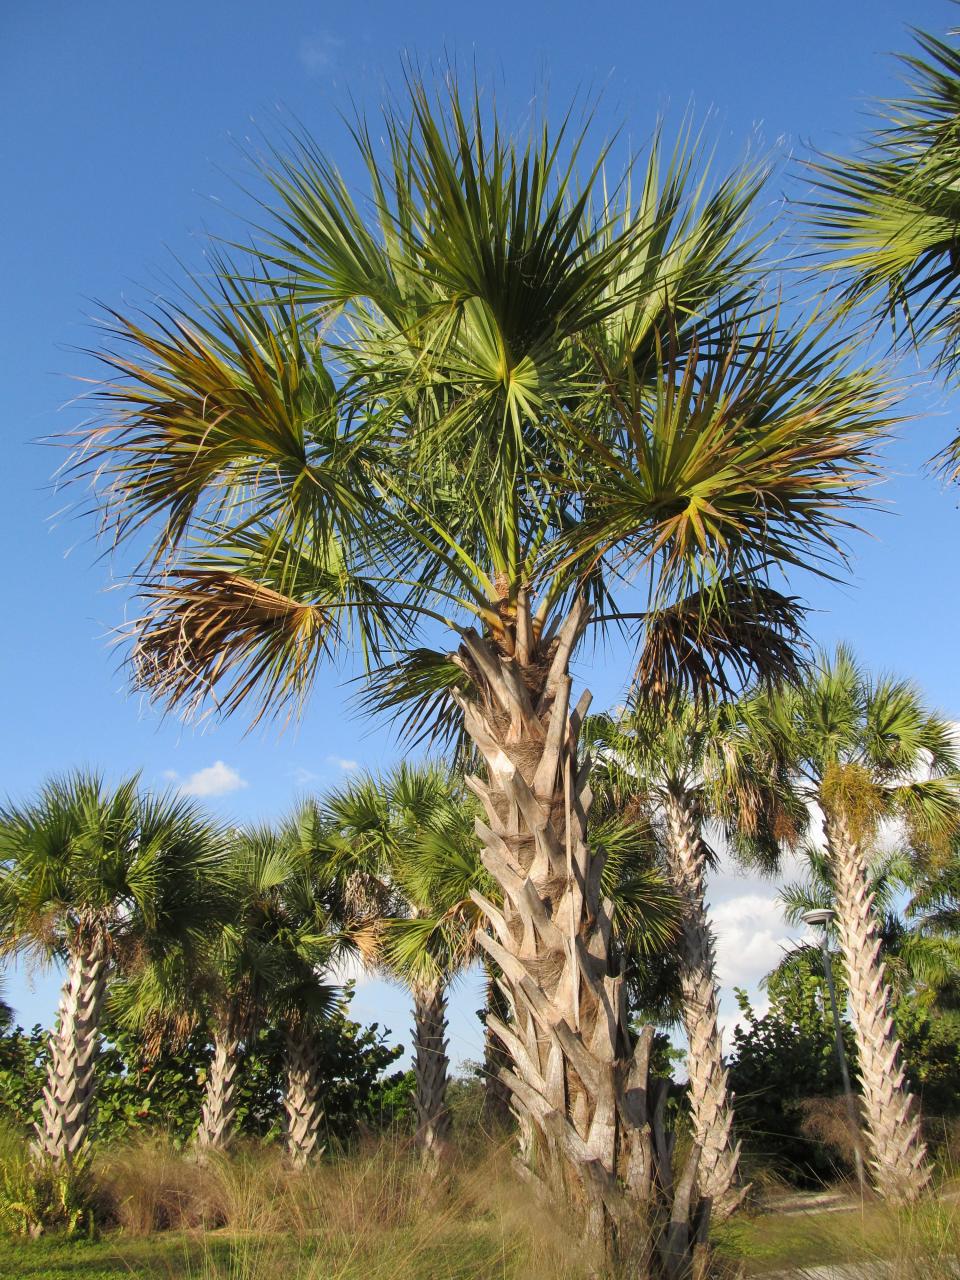 This is a Sabal Palm tree.